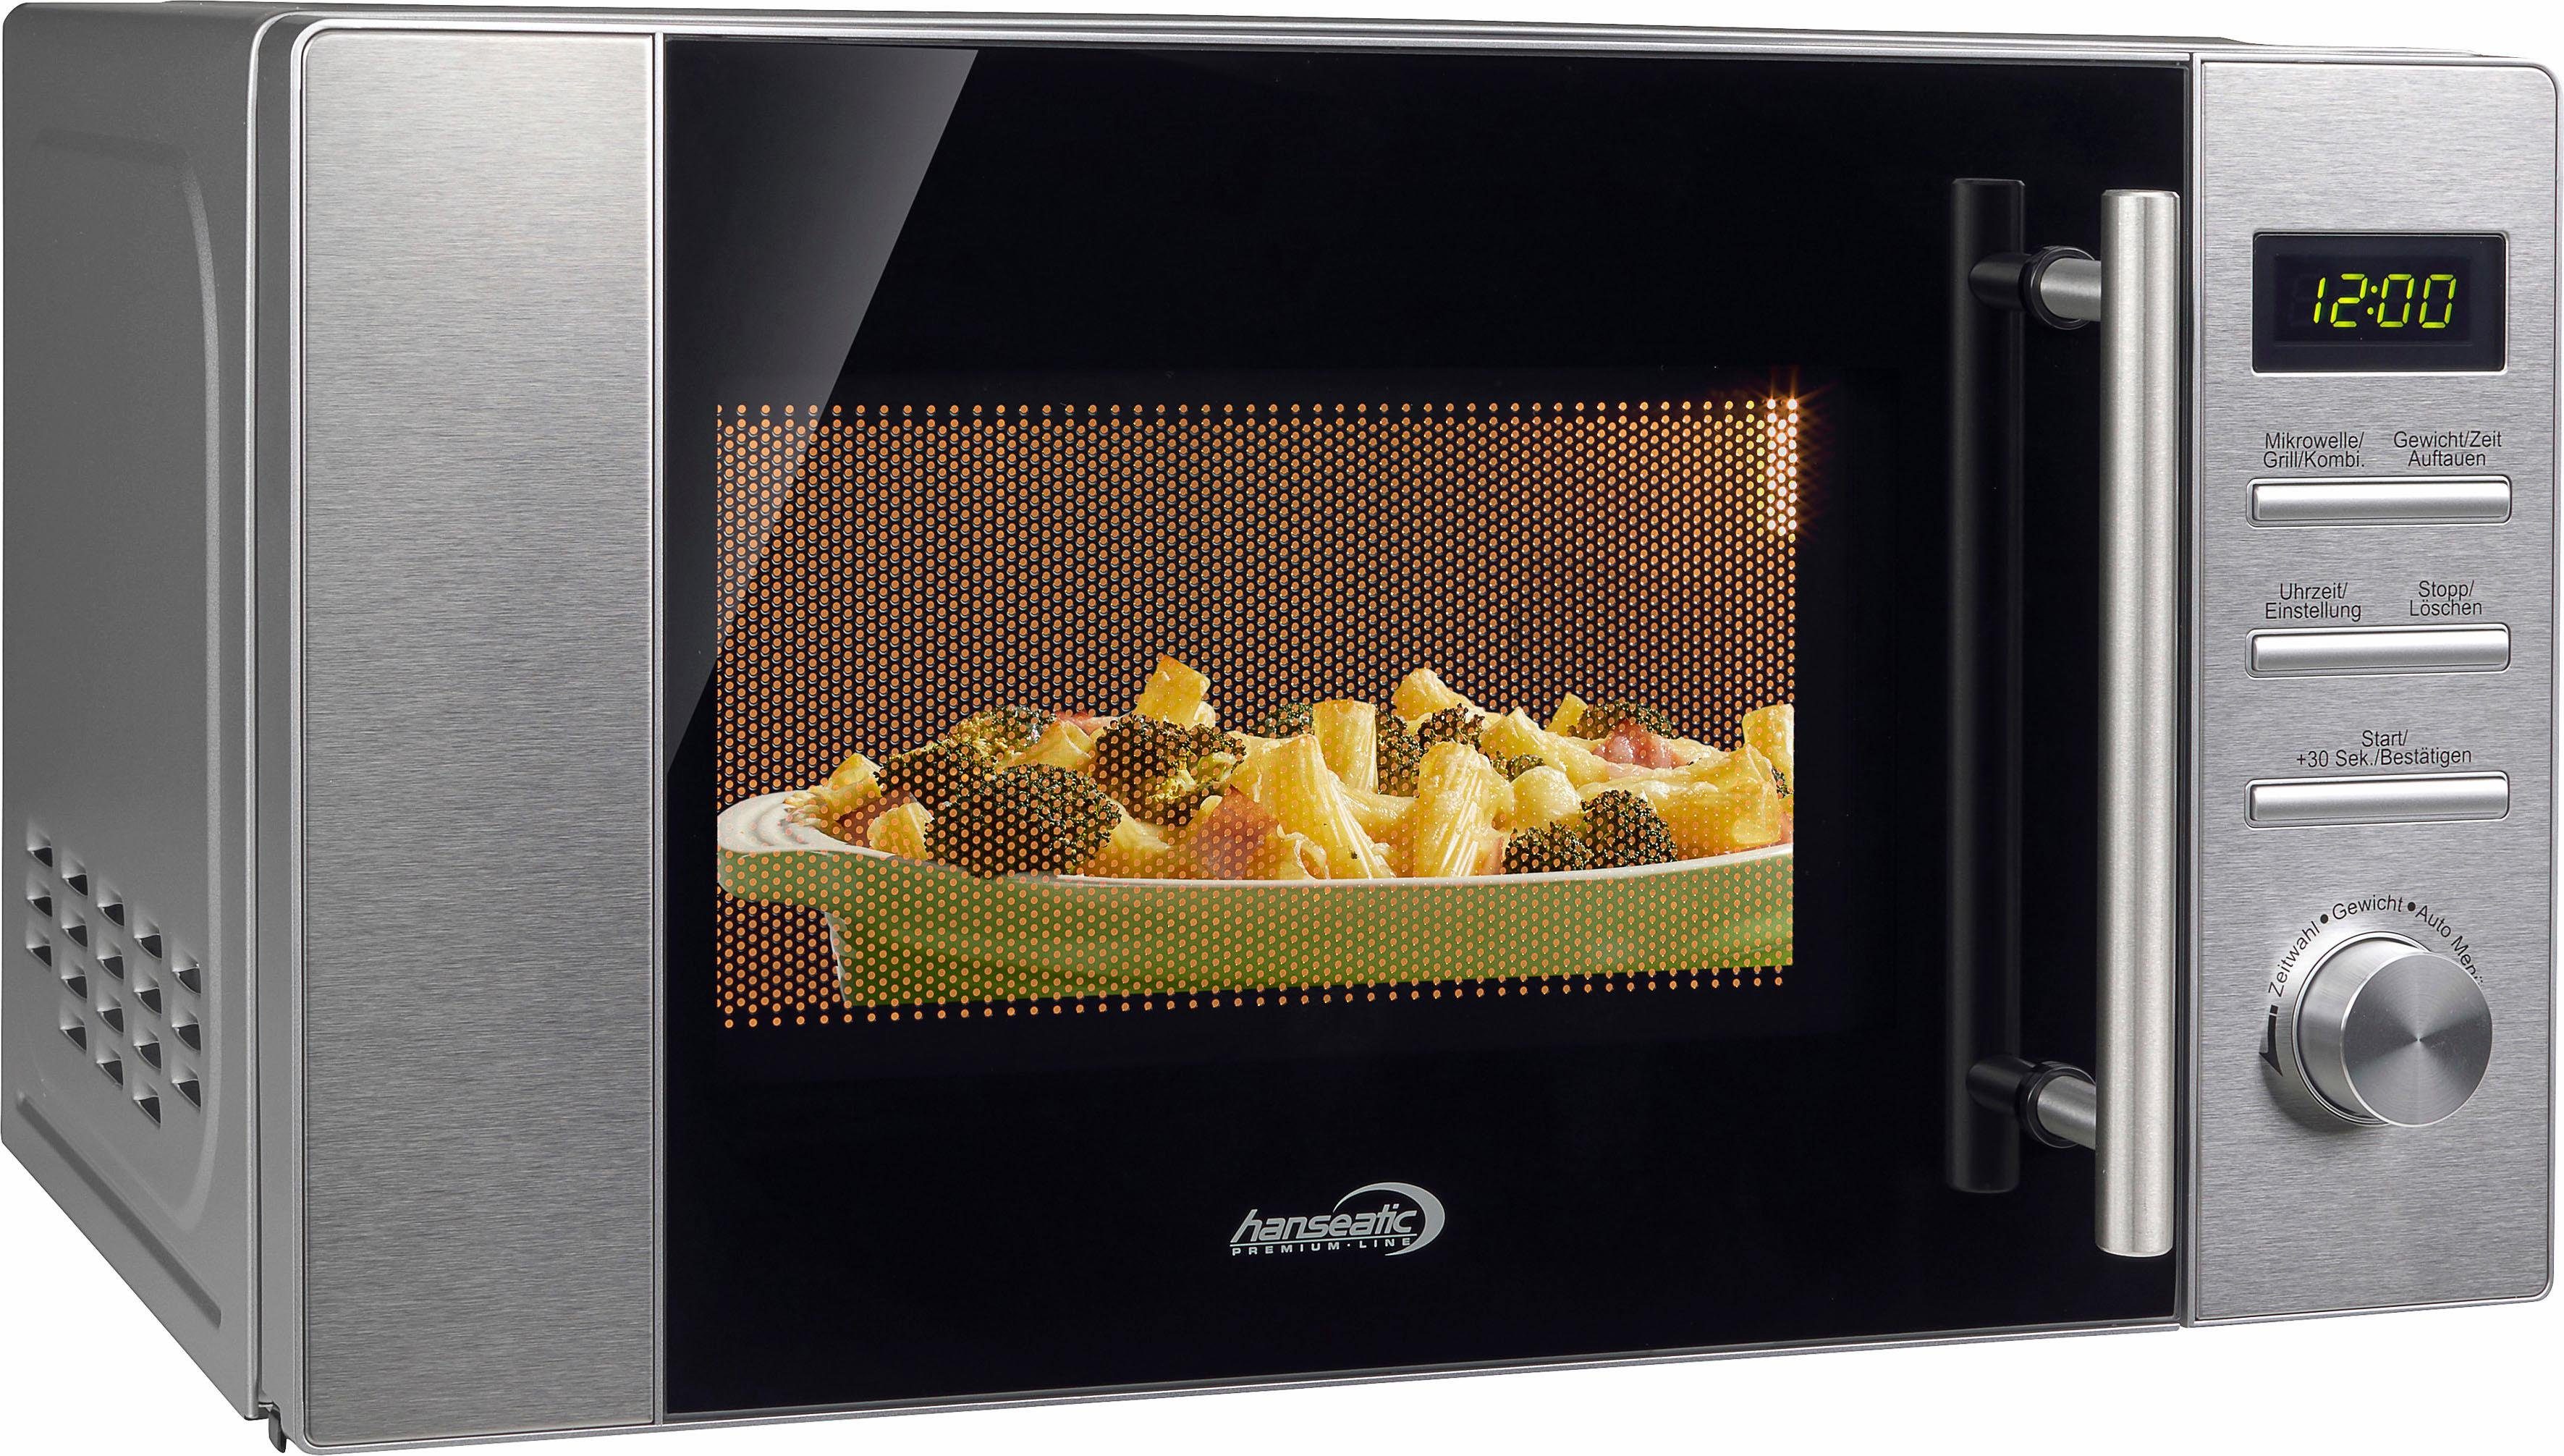 l Hanseatic 656920, Grill, 20 Mikrowelle